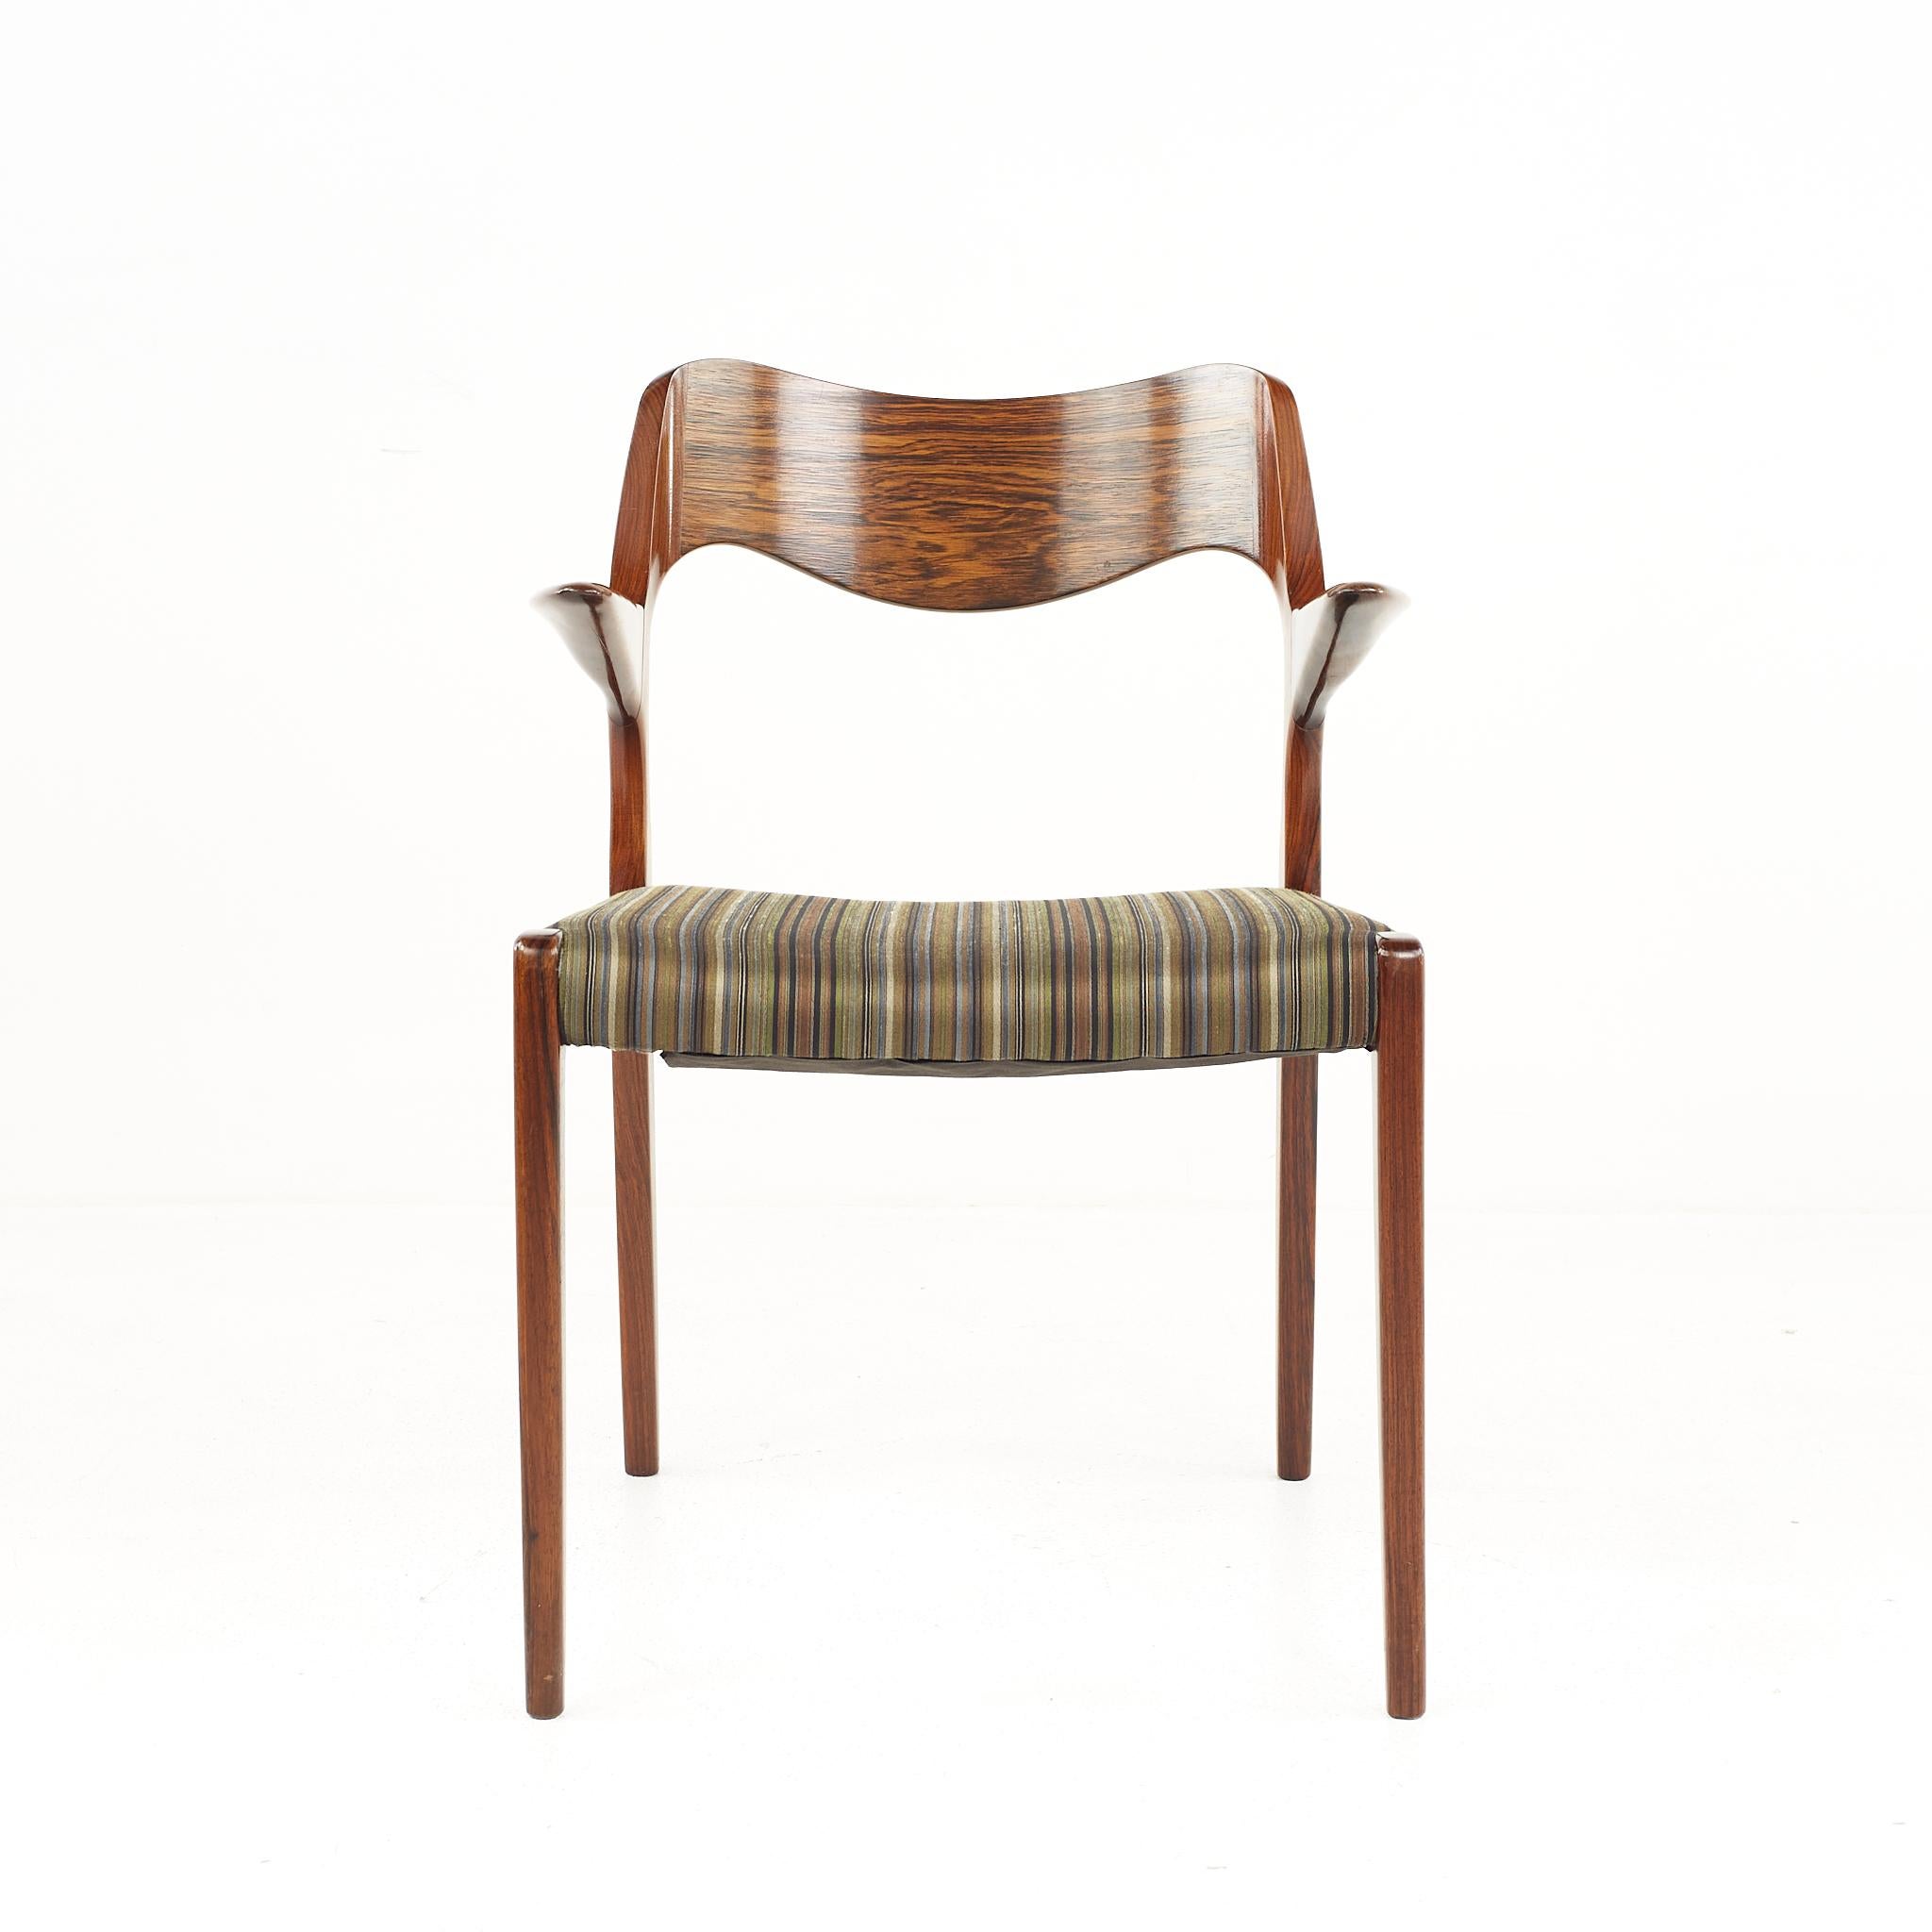 Niels Moller Model 55 mid century rosewood dining or desk chair

The chair measures: 21.5 wide x 19 deep x 32 high, with a seat height of 18 inches and arm height of 26 inches

All pieces of furniture can be had in what we call restored vintage